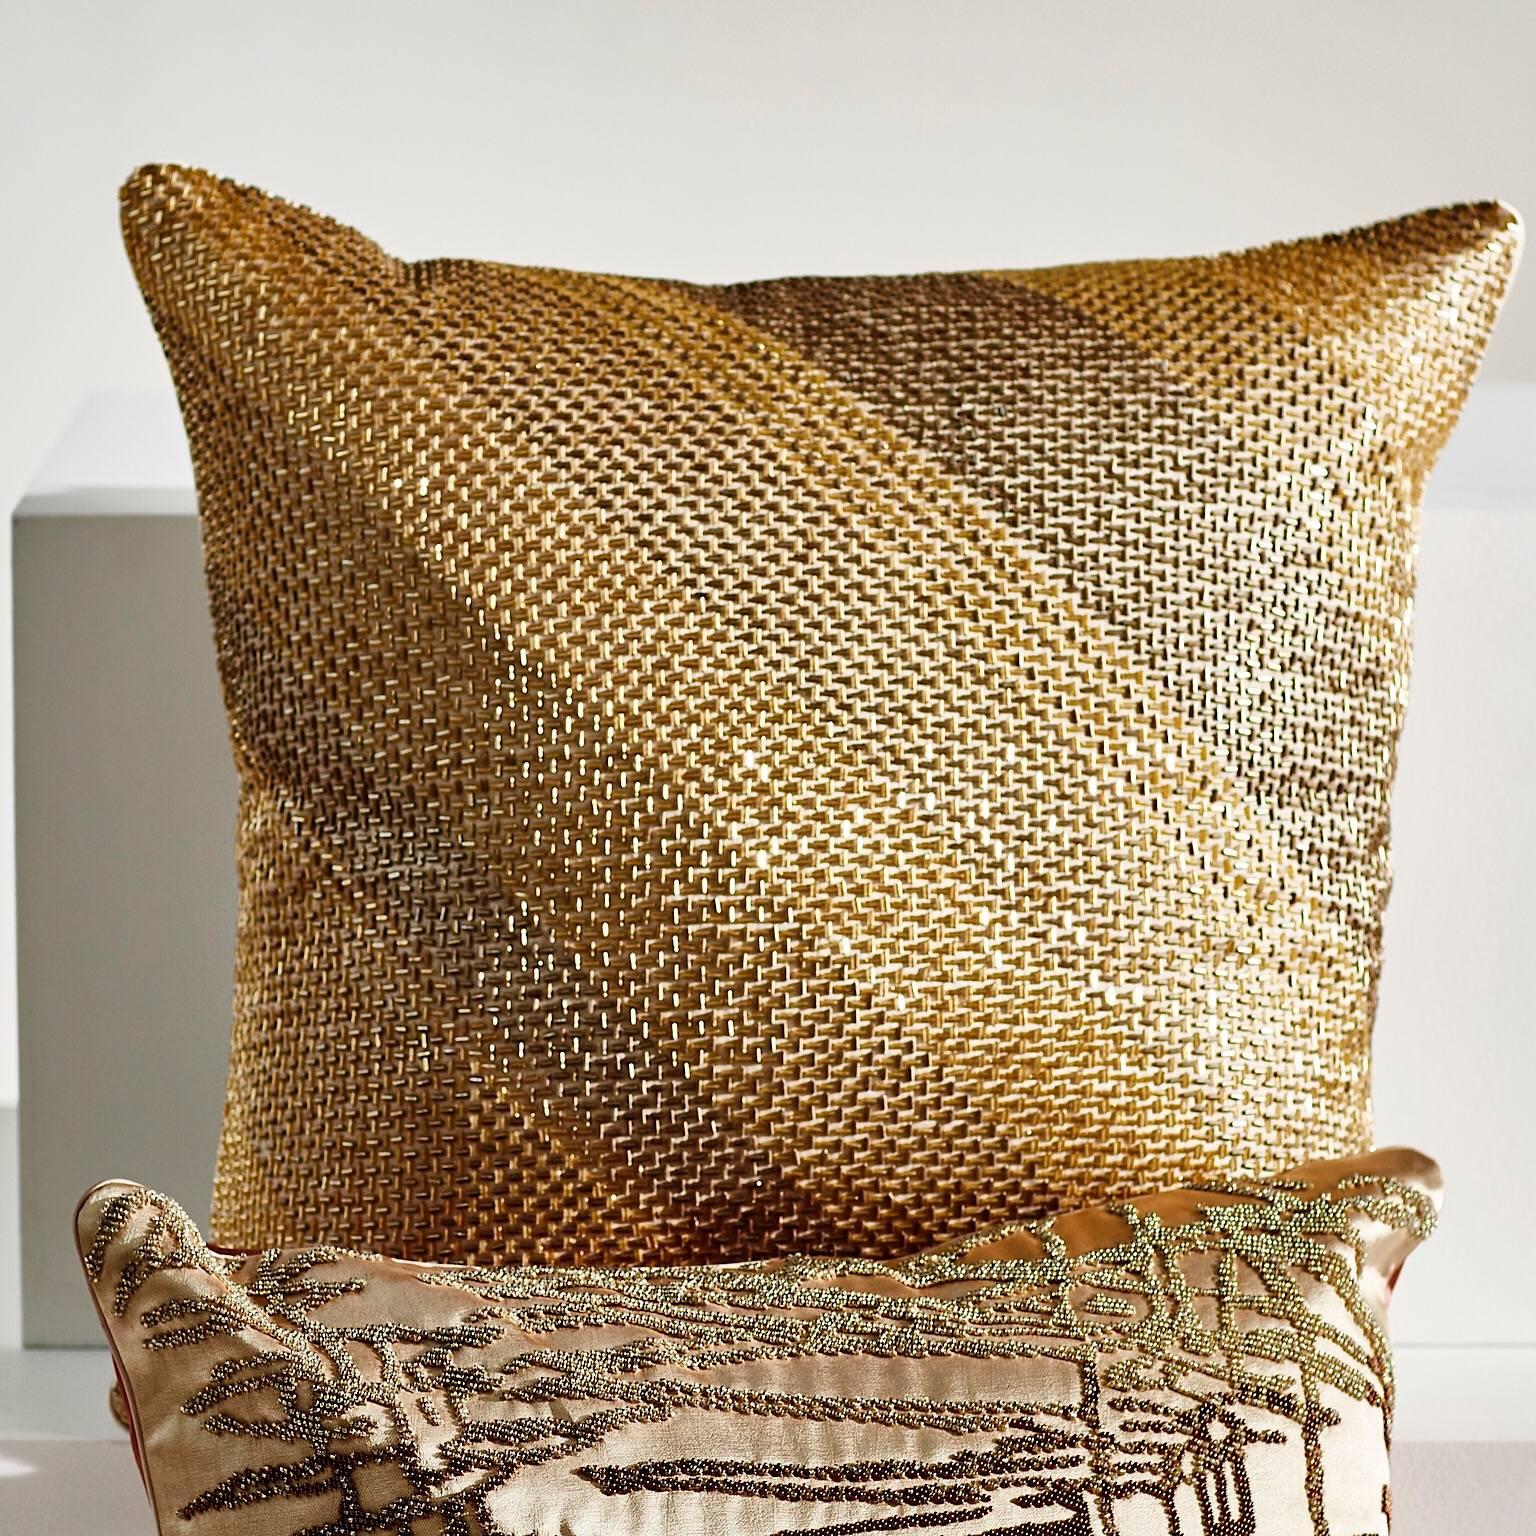 British Handcrafted Embroidered Pillows Glass Beads Geometric Diagonal Grids Gold Silver For Sale